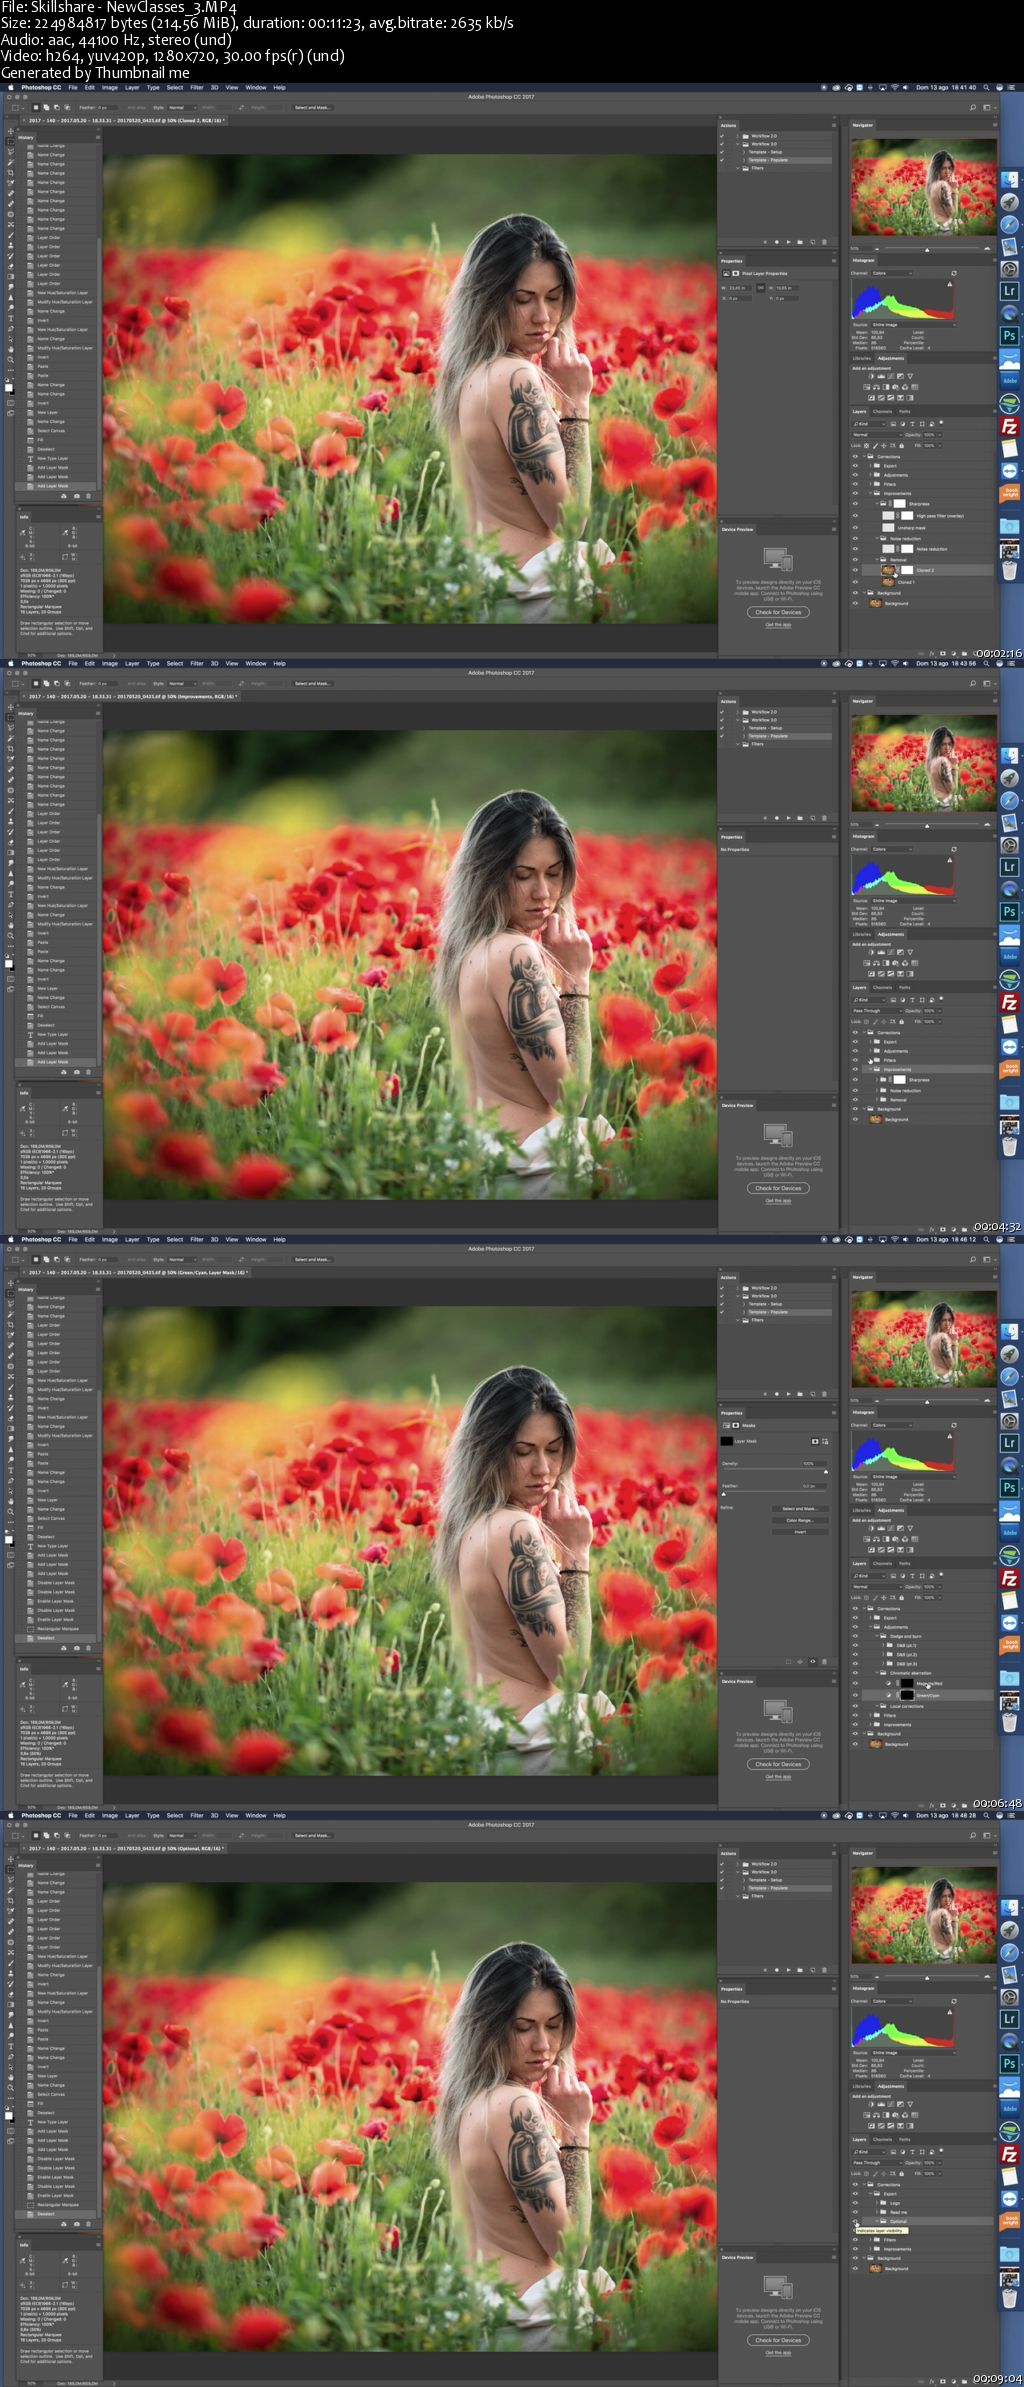 Complete Photoshop workflow for portrait photography: version 3.0 (PS actions included)